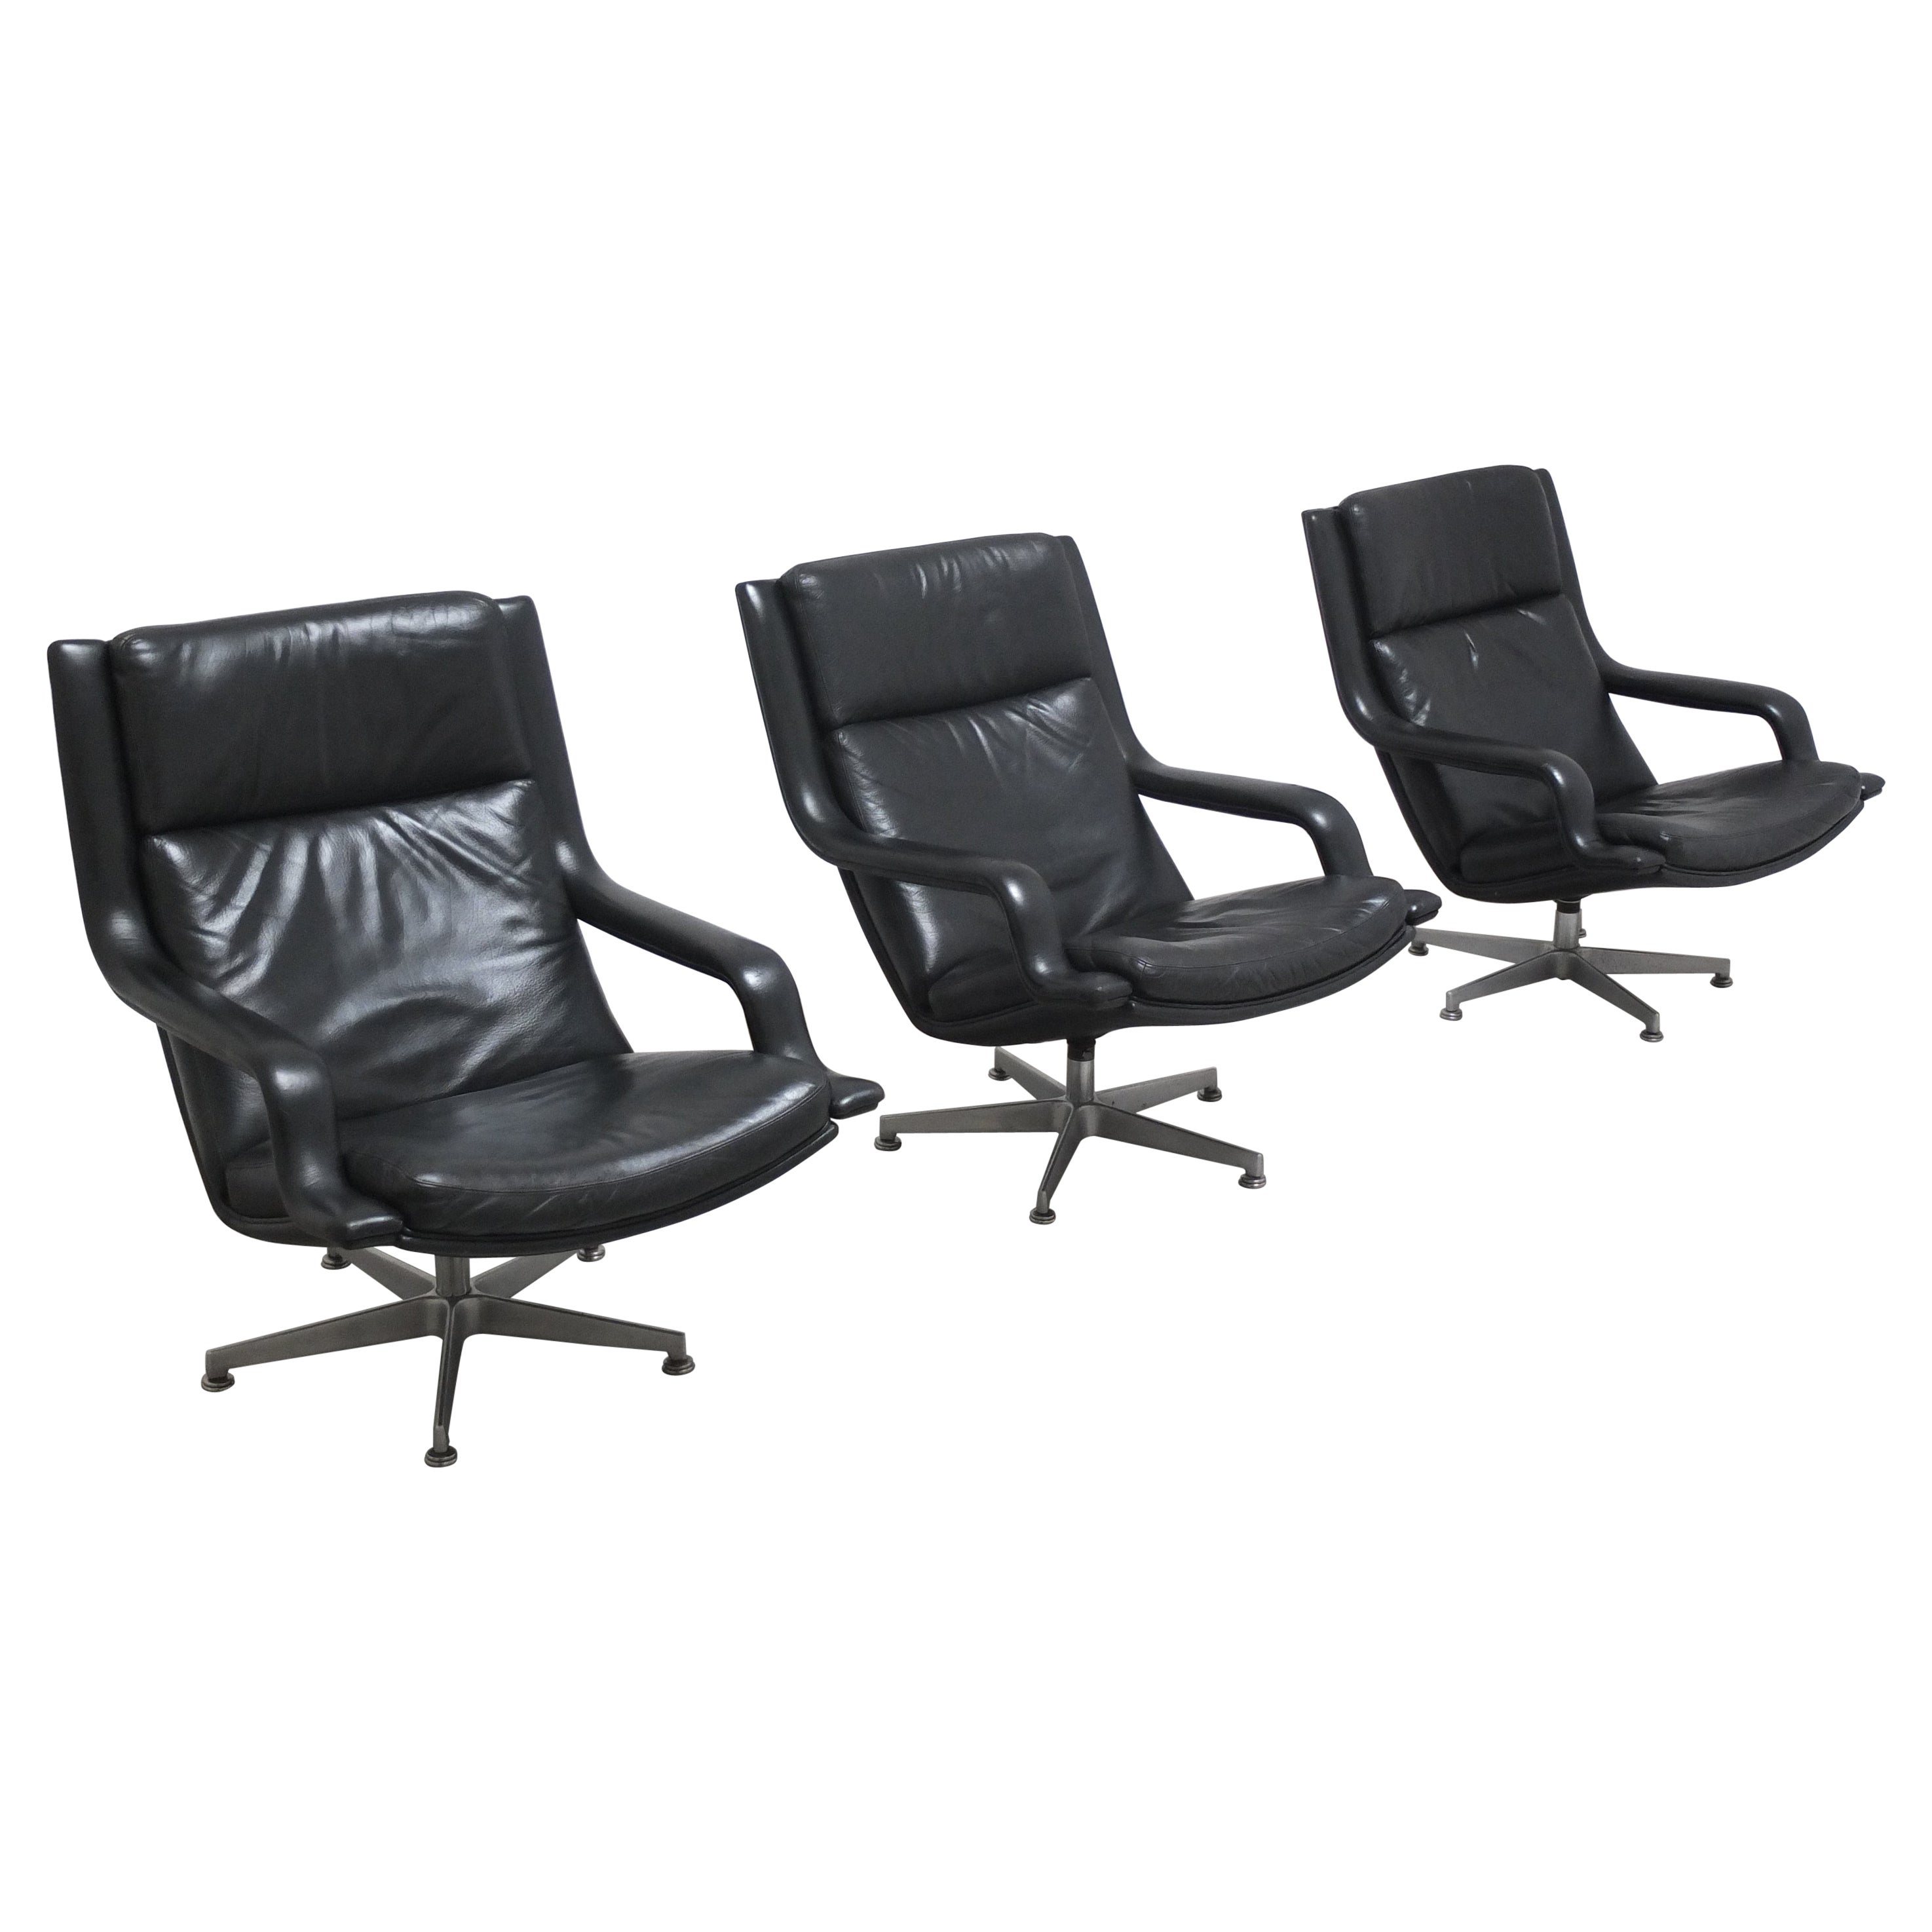 Leather 'F152' Swivel Lounge Chairs by Geoffrey Harcourt for Artifort, 1970s For Sale